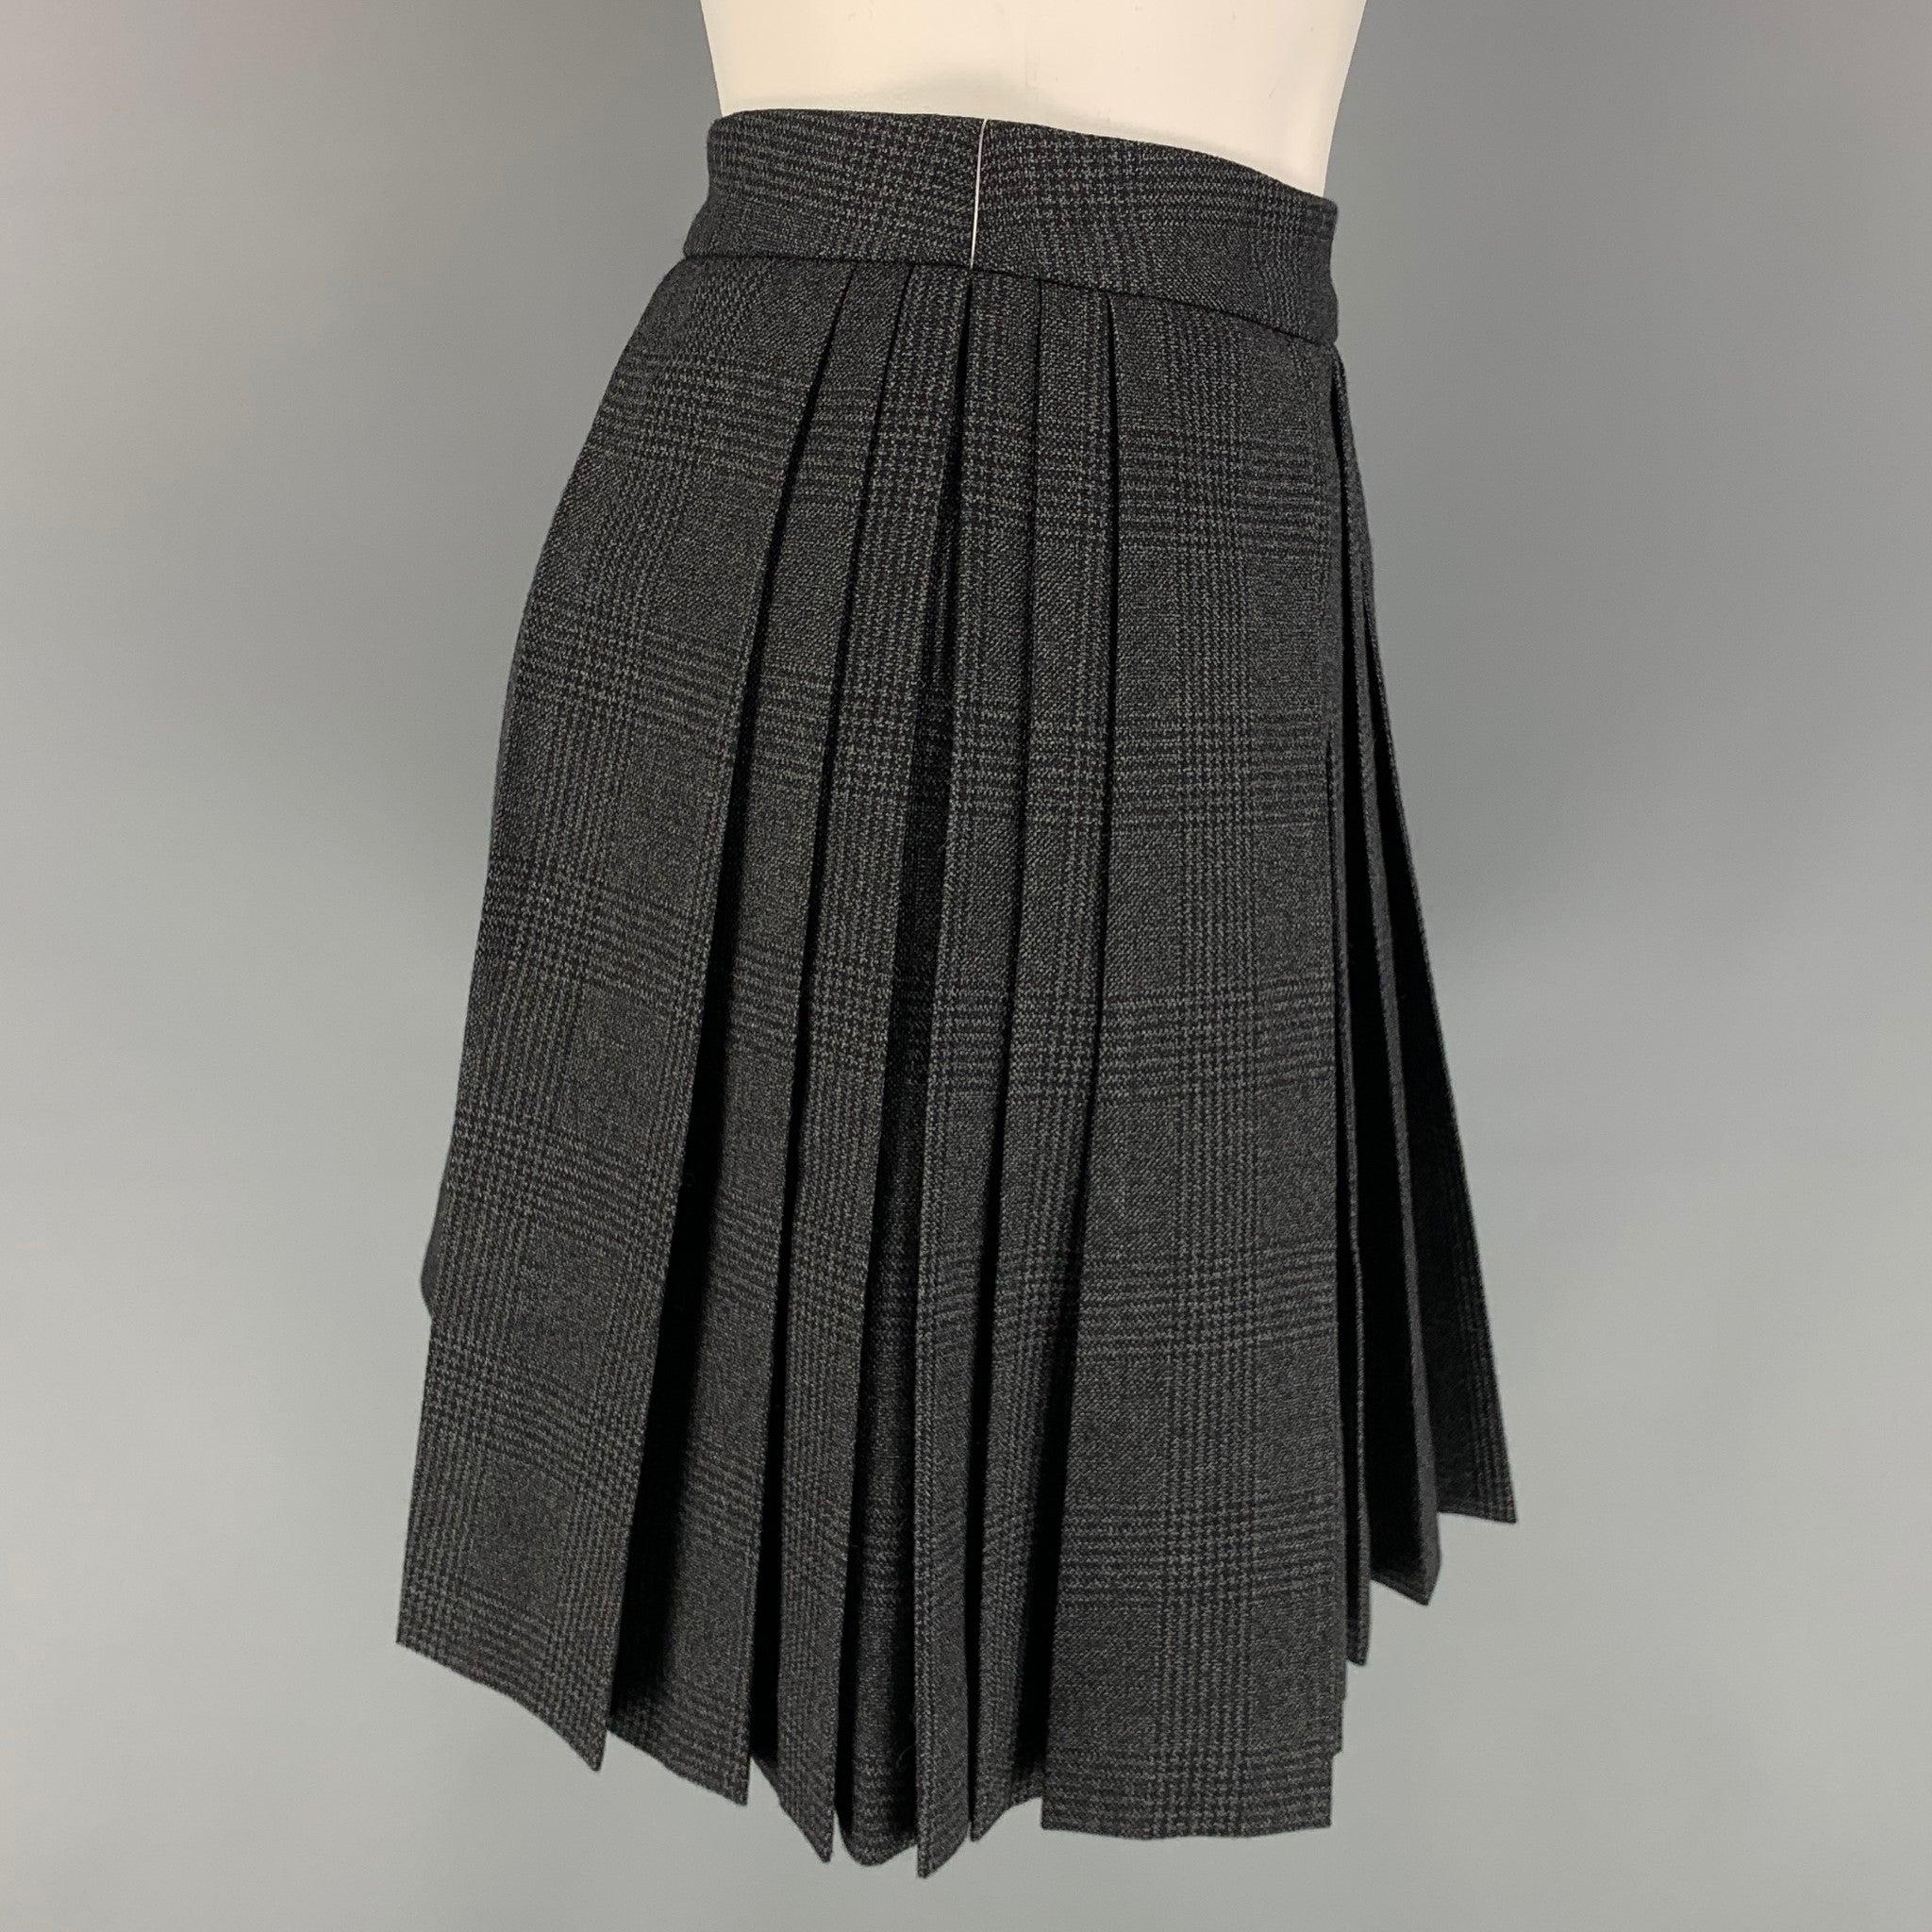 CELINE mini skirt comes in a charcoal plaid wool with a slip liner featuring a pleated style, and a side zip up closure. Made in Italy.
Excellent
Pre-Owned Condition. 

Marked:   36 

Measurements: 
  Waist: 28 inches  Hip: 36 inches  Length: 16